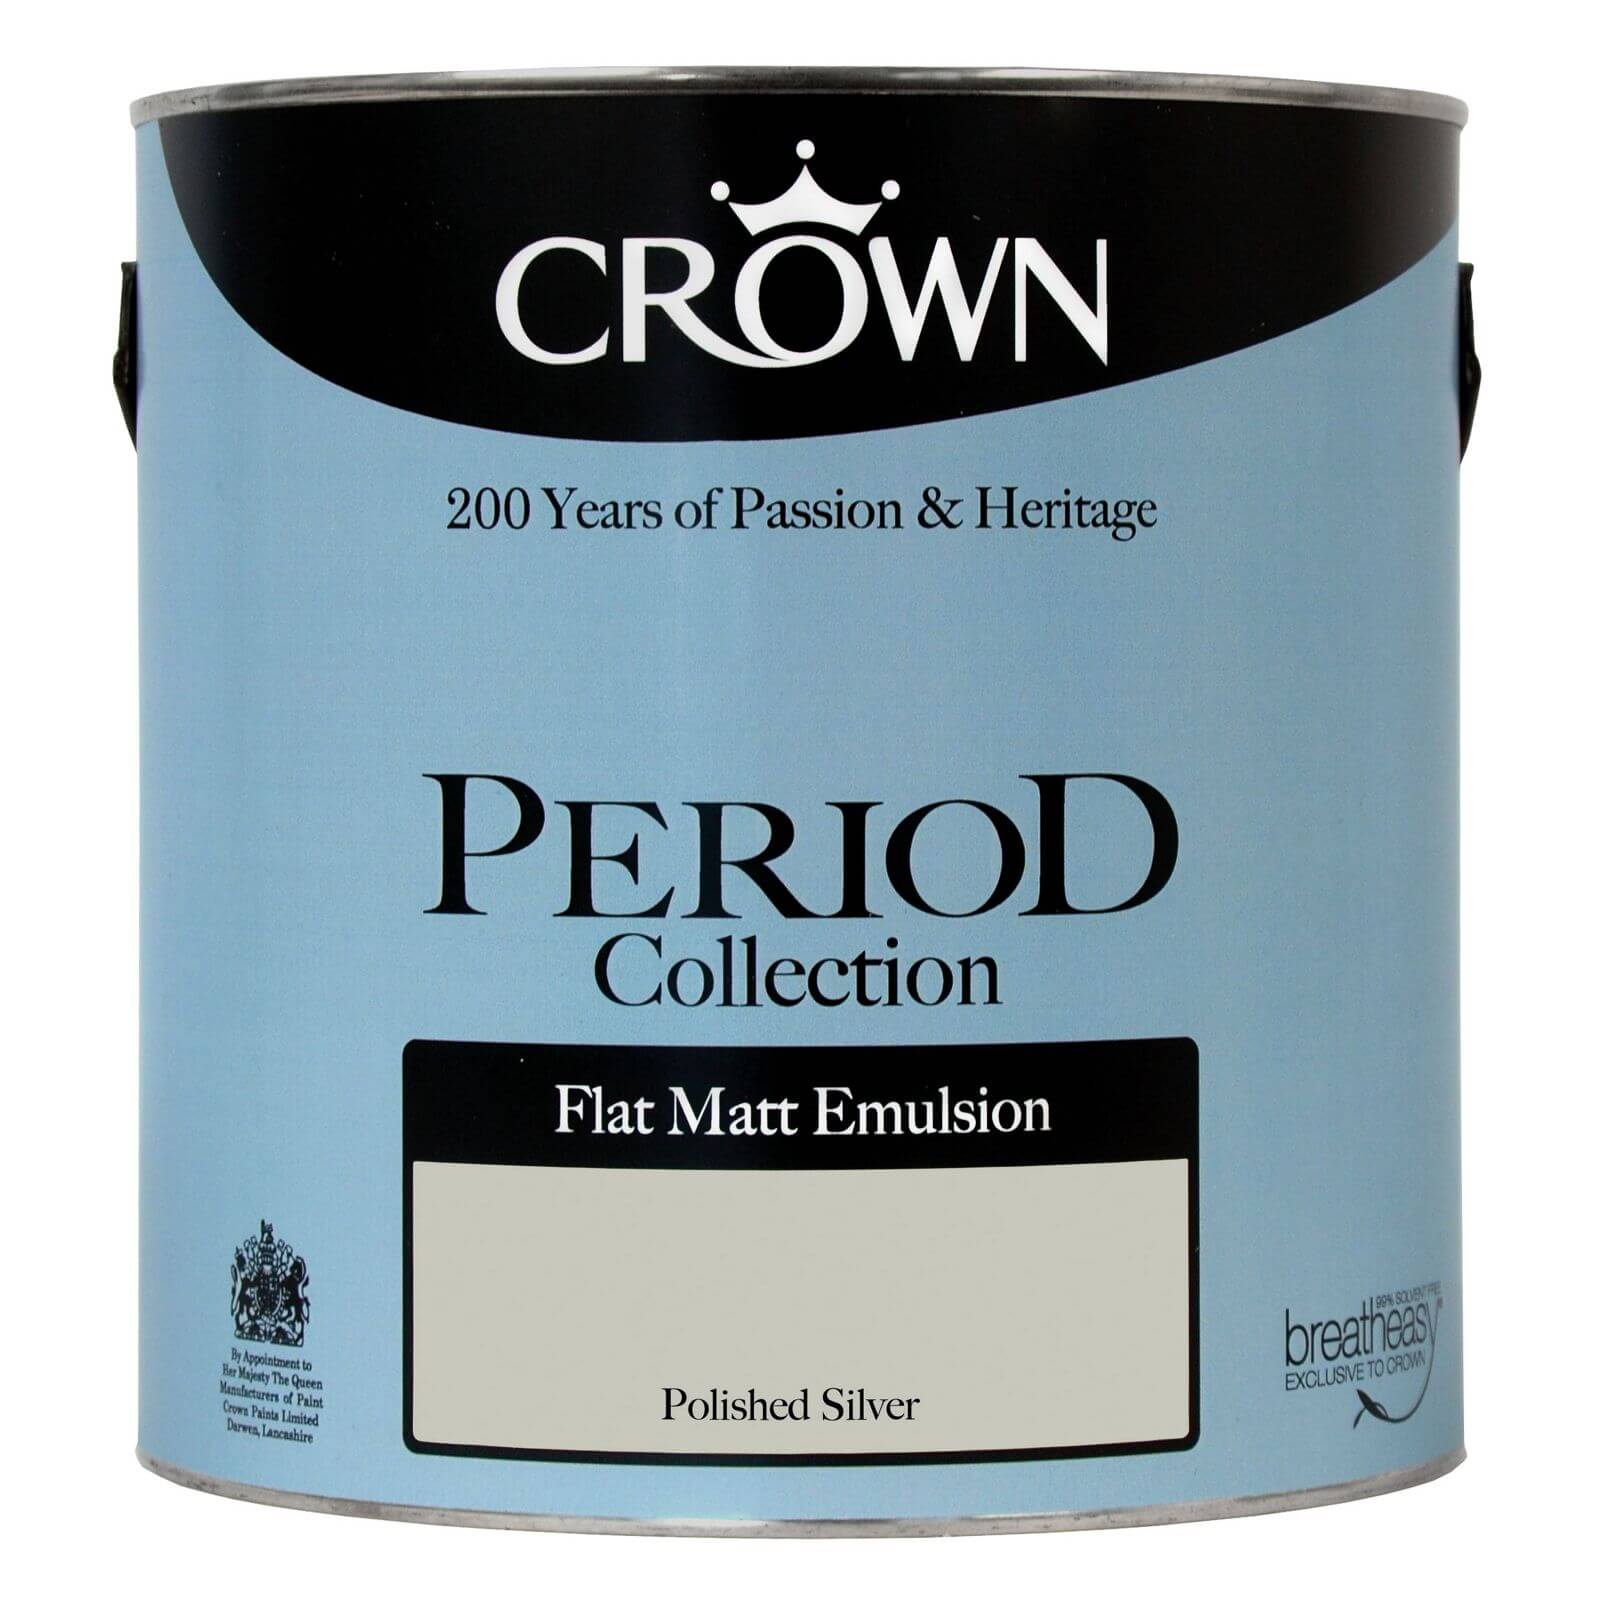 Crown Period Collection Polished Silver - Flat Matt Emulsion Paint - 2.5L